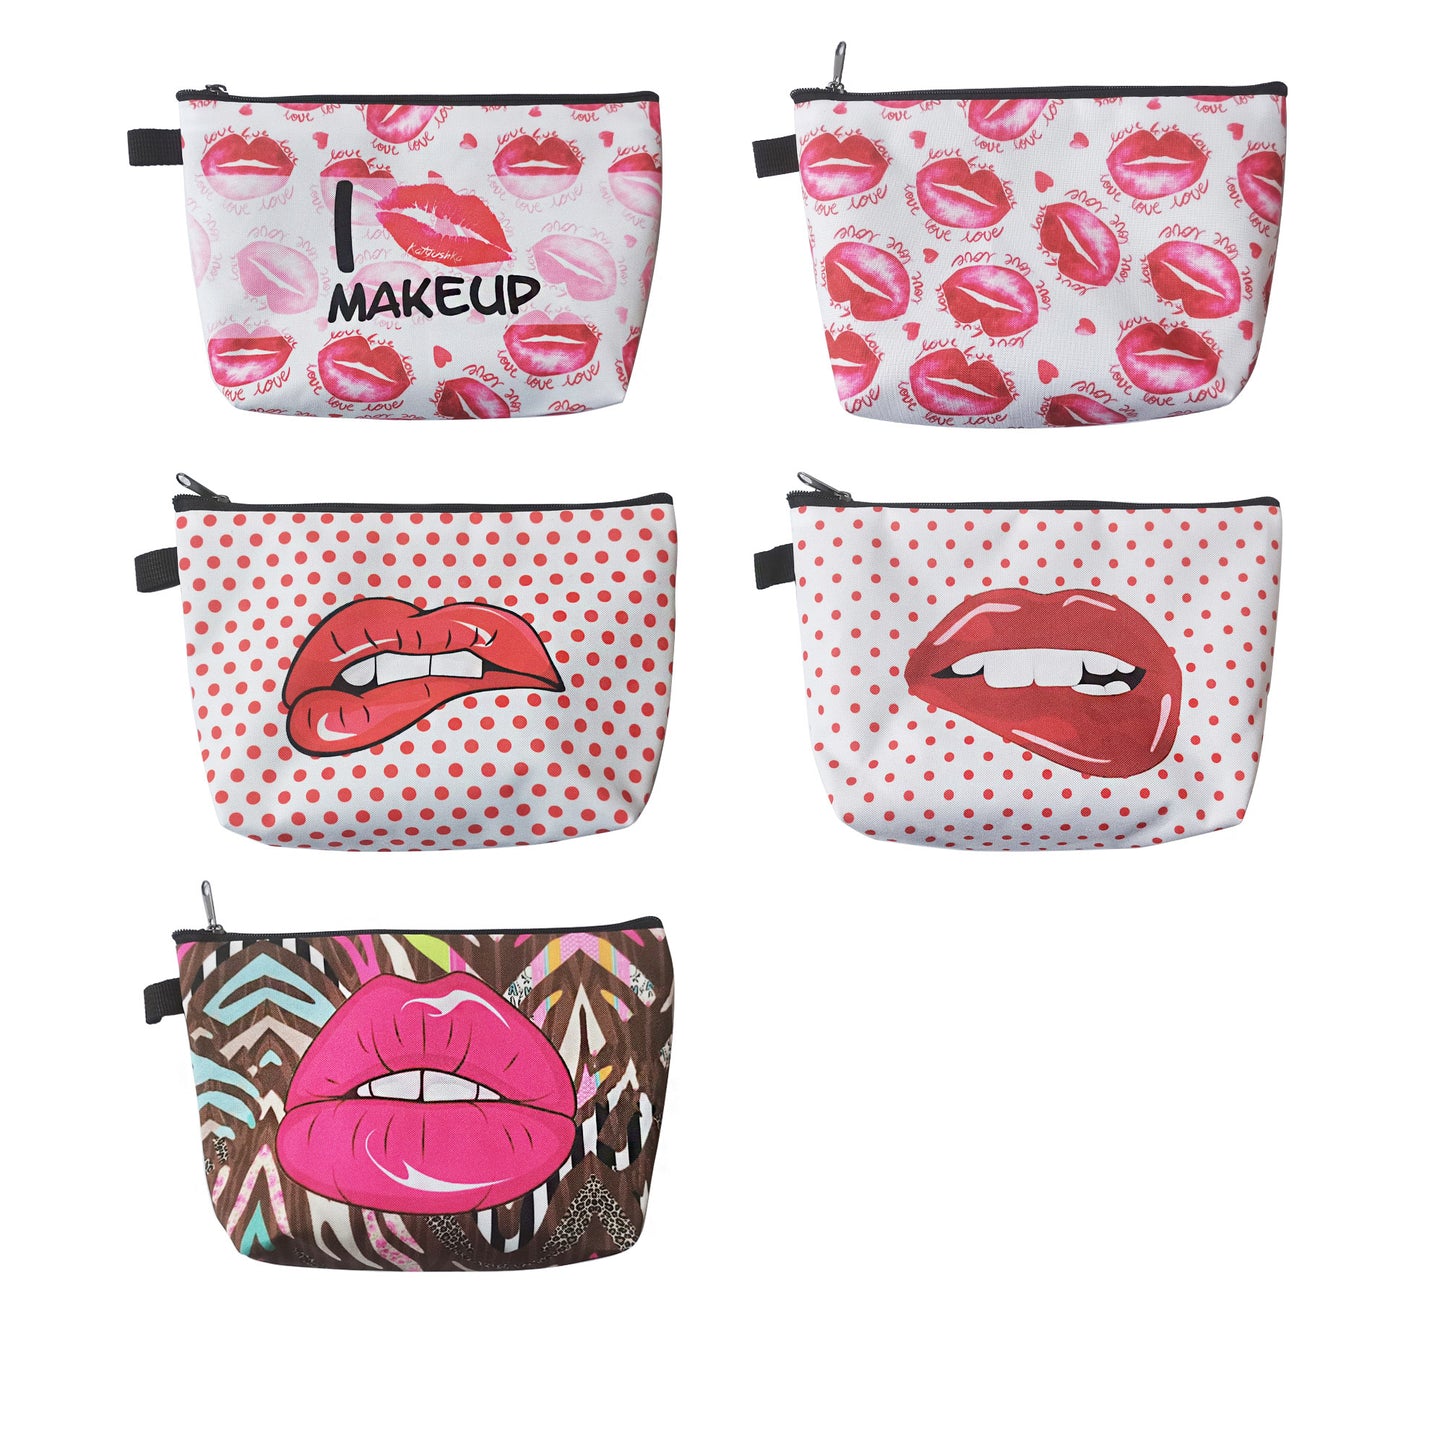 LIPS GRAPHIC MAKEUP POUCH 3111-70 (12PC)